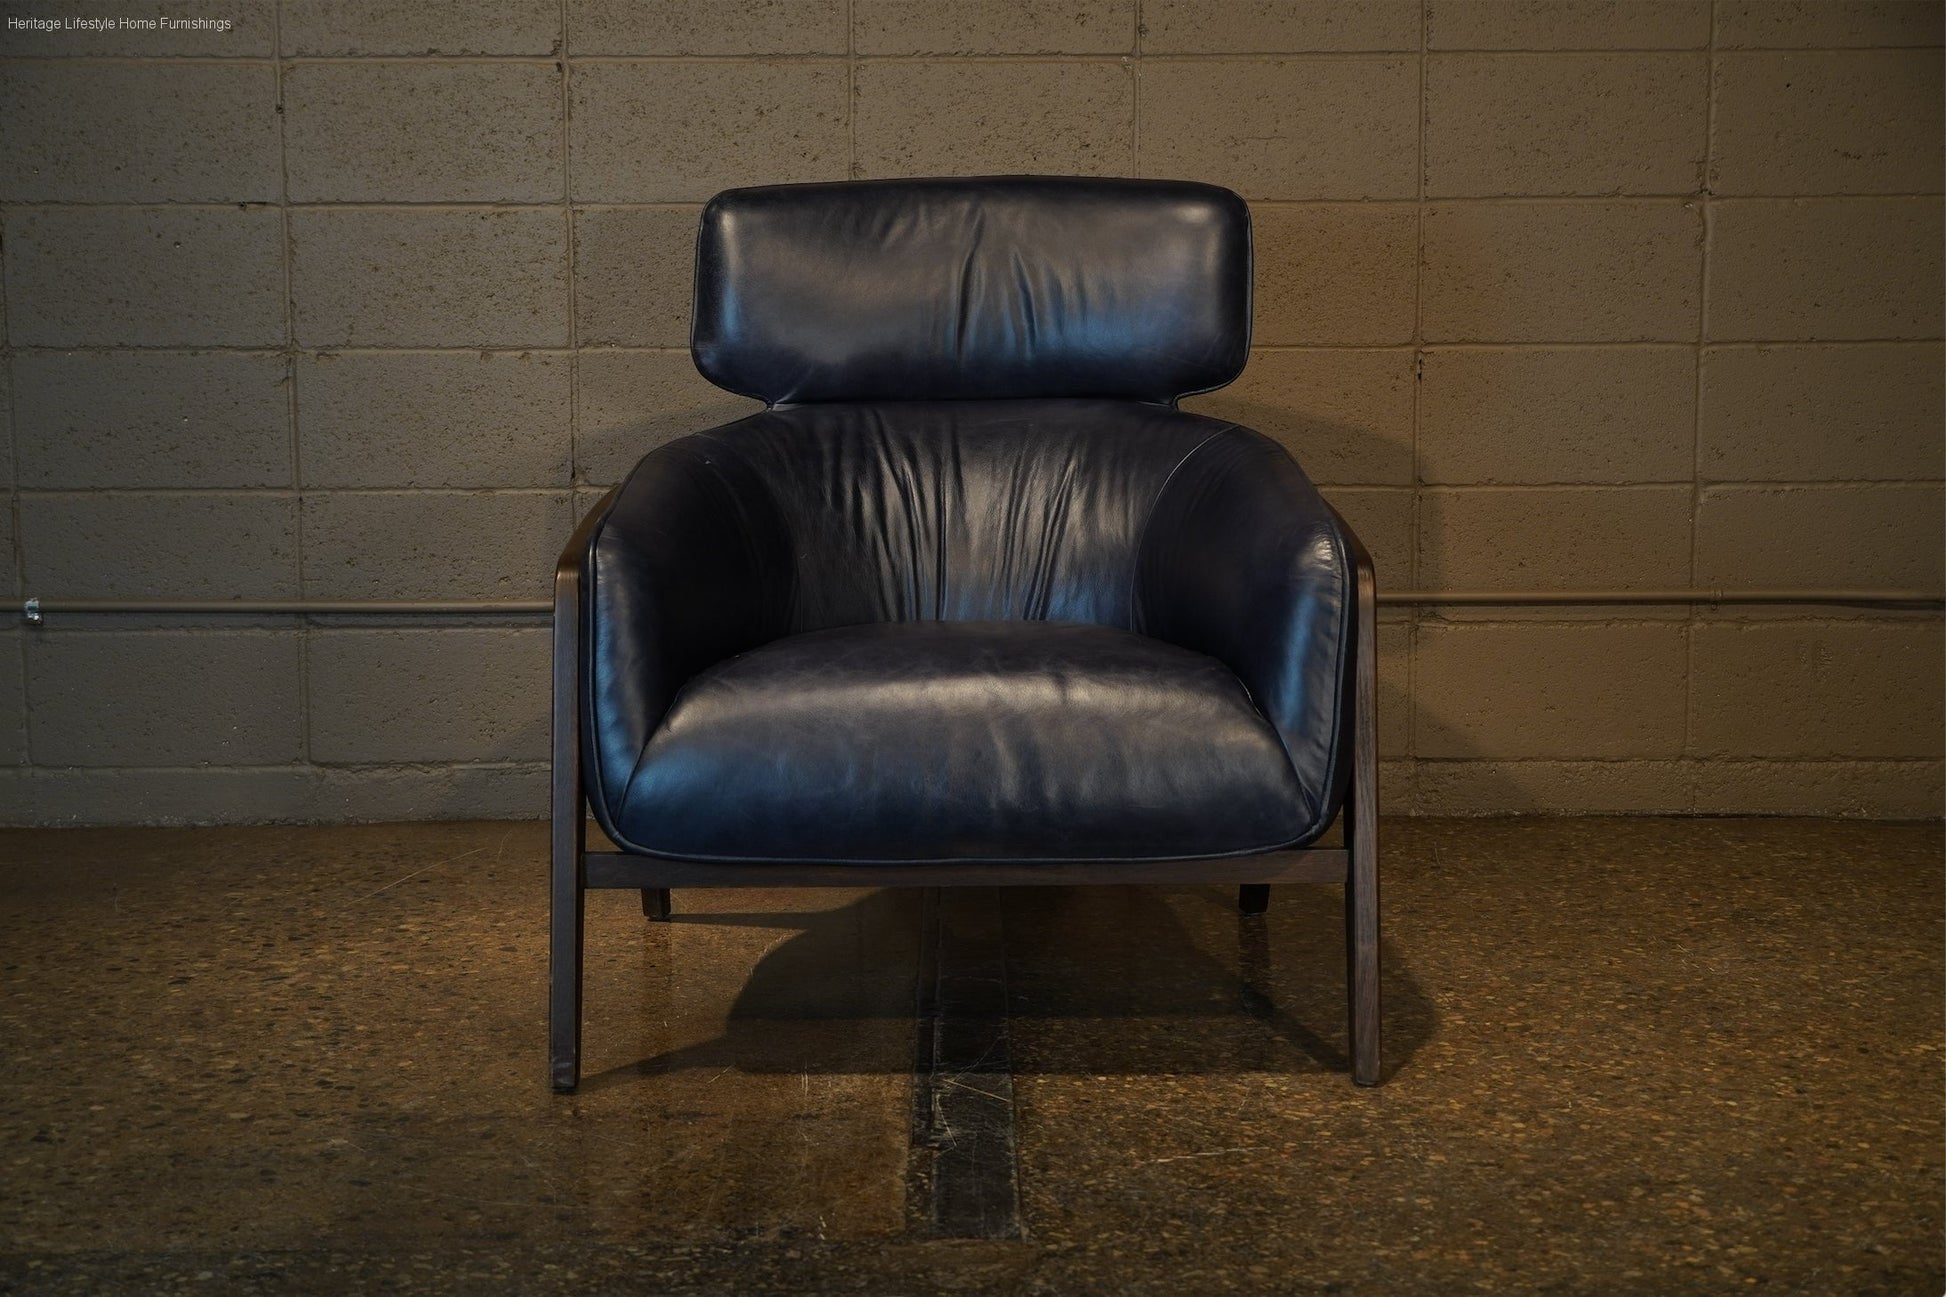 A993-1(2A) Leather Accent Chair - Navy Furniture Stores Burlington Ontario Near Me HLHF